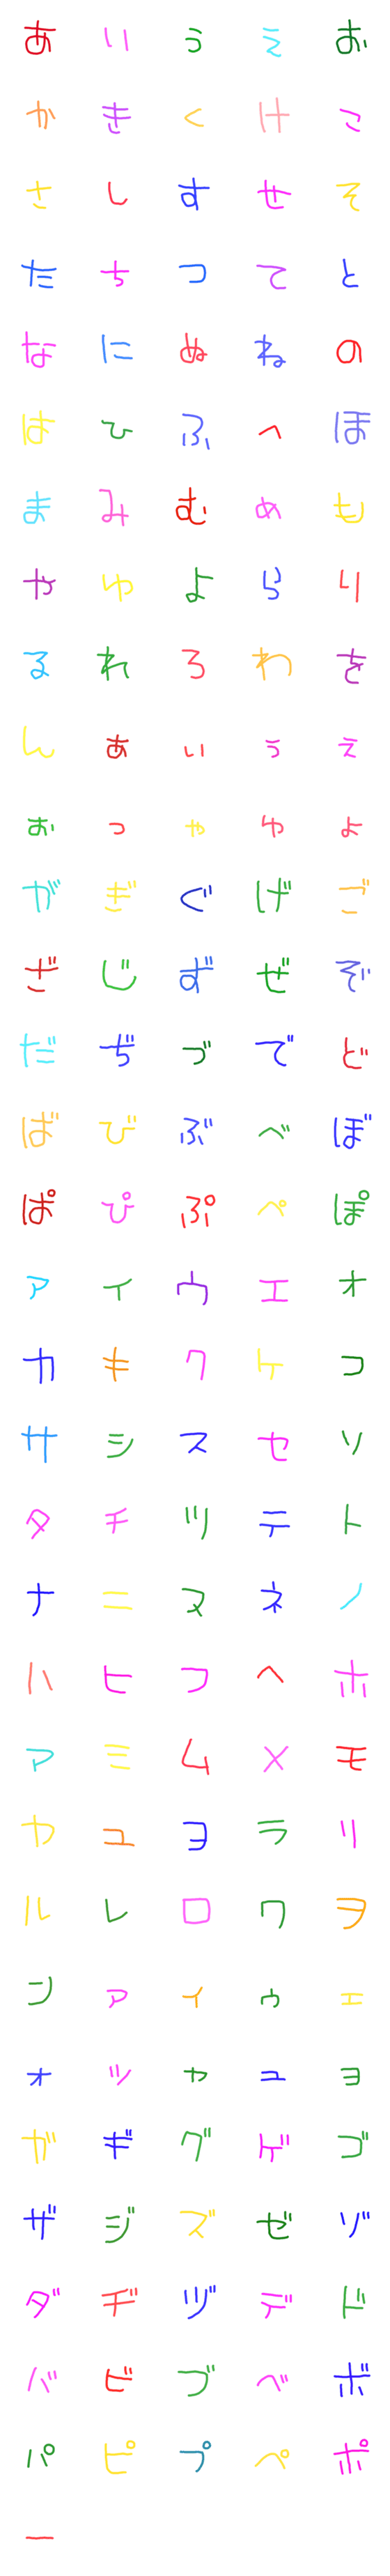 [LINE絵文字]【動く】こども文字☆カラーの画像一覧